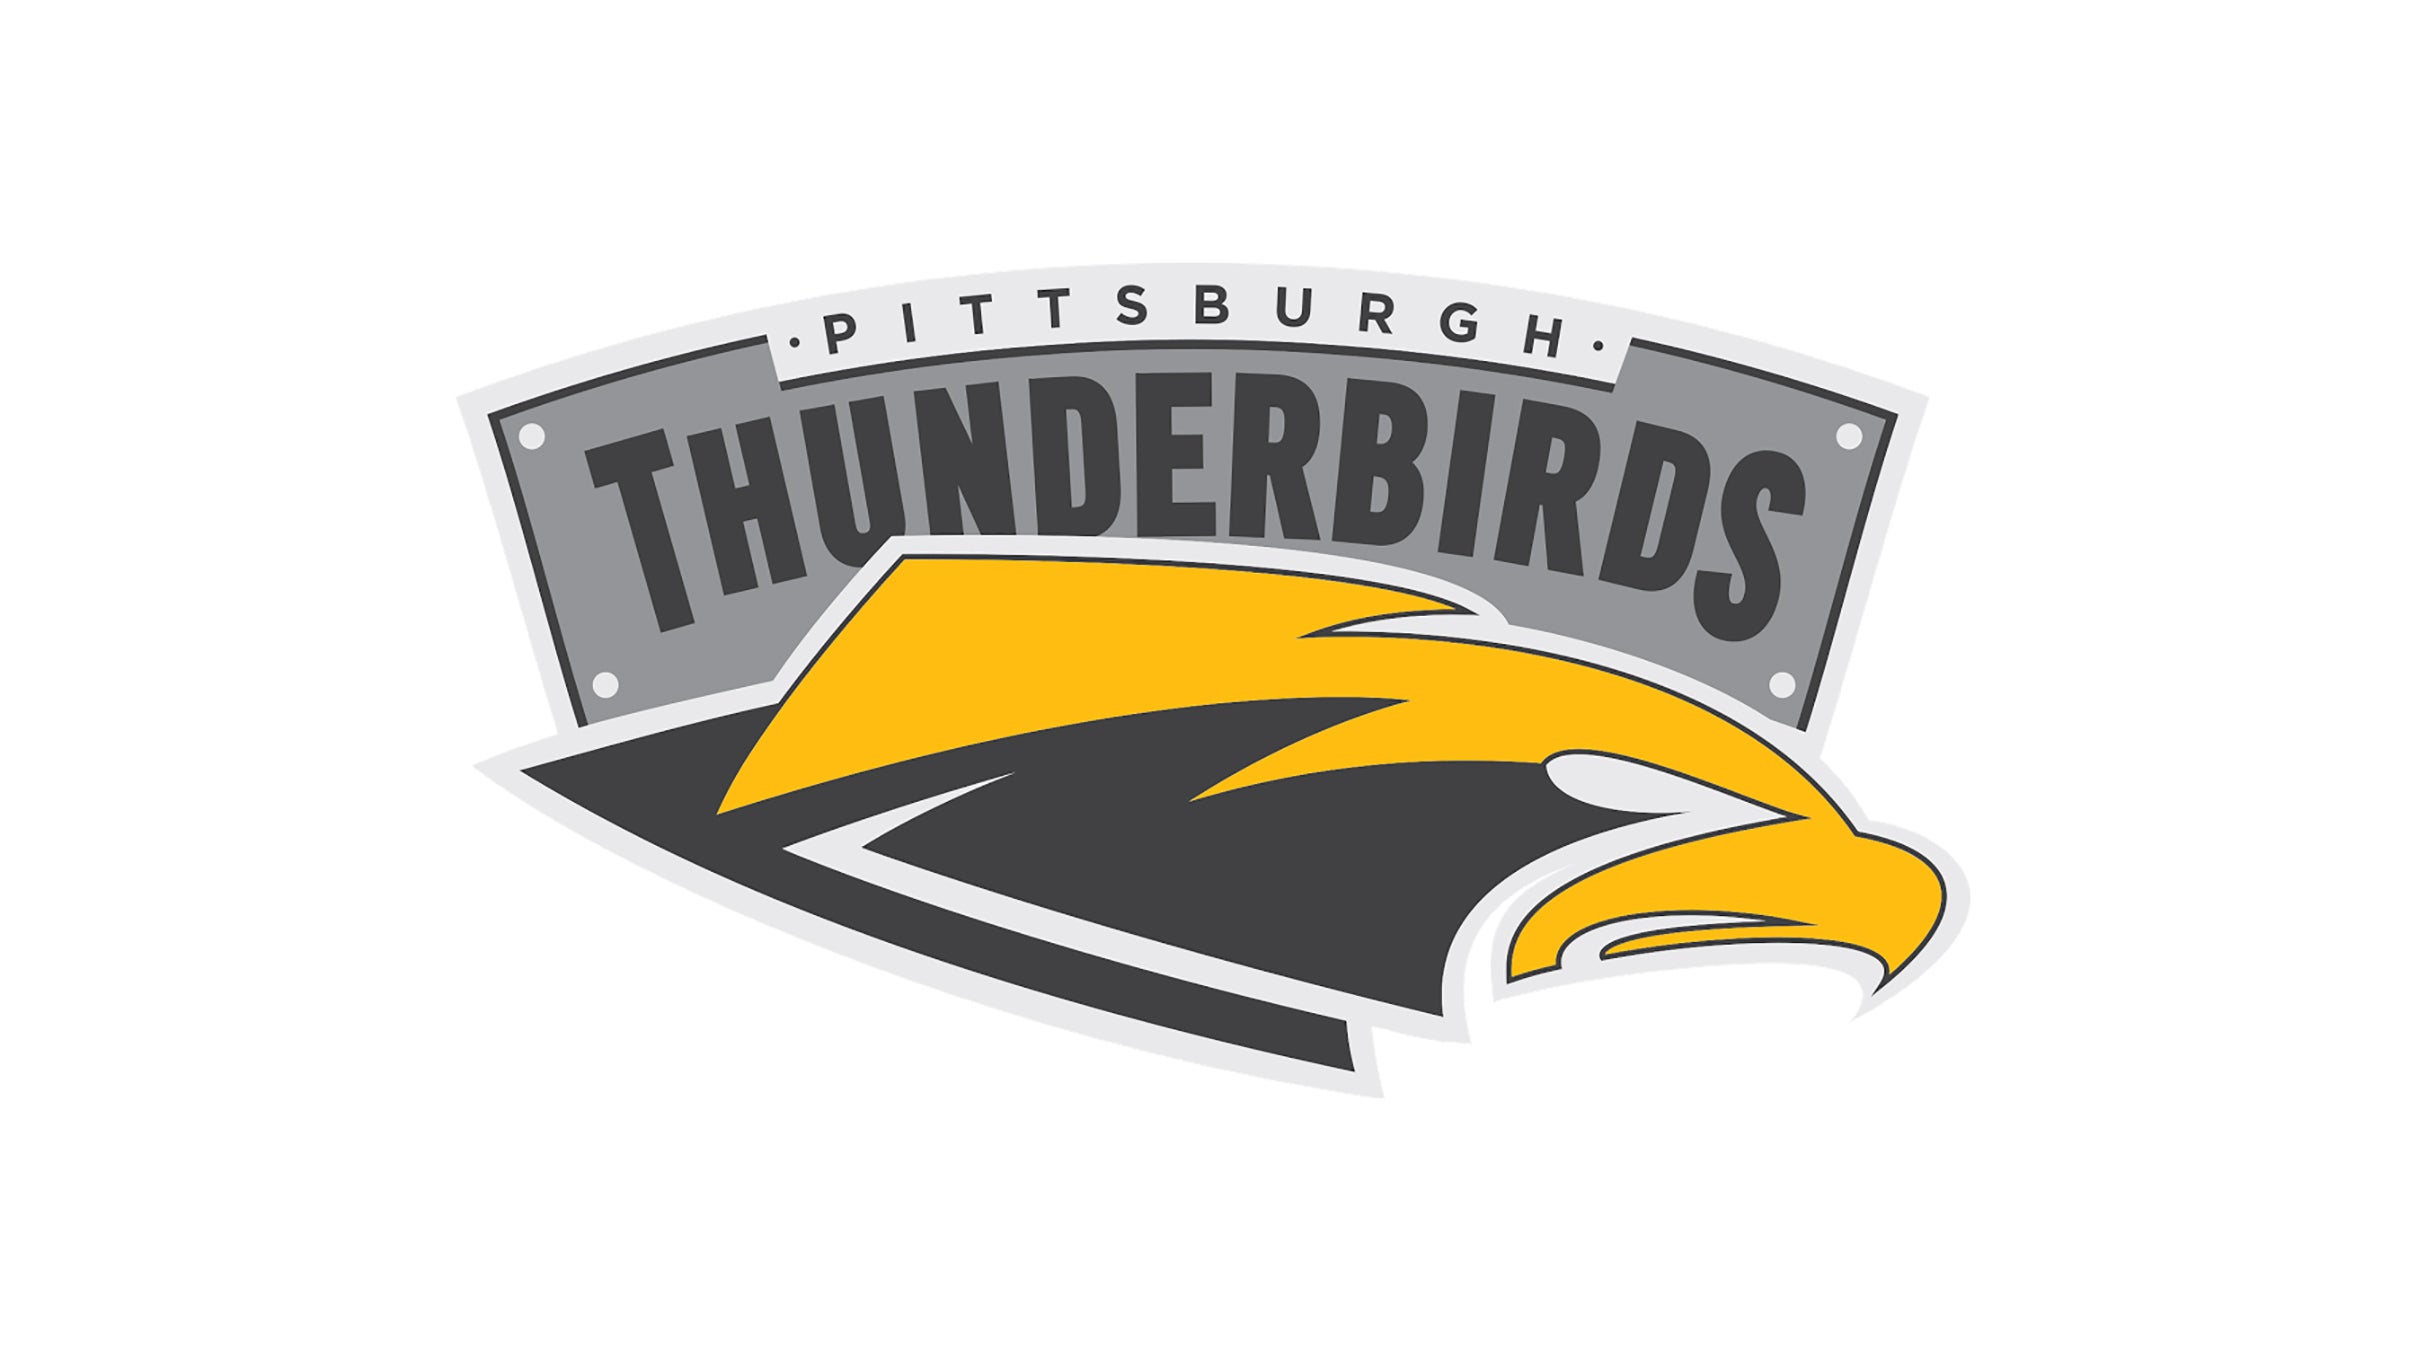 Pittsburgh Thunderbirds vs. Indianapolis AlleyCats